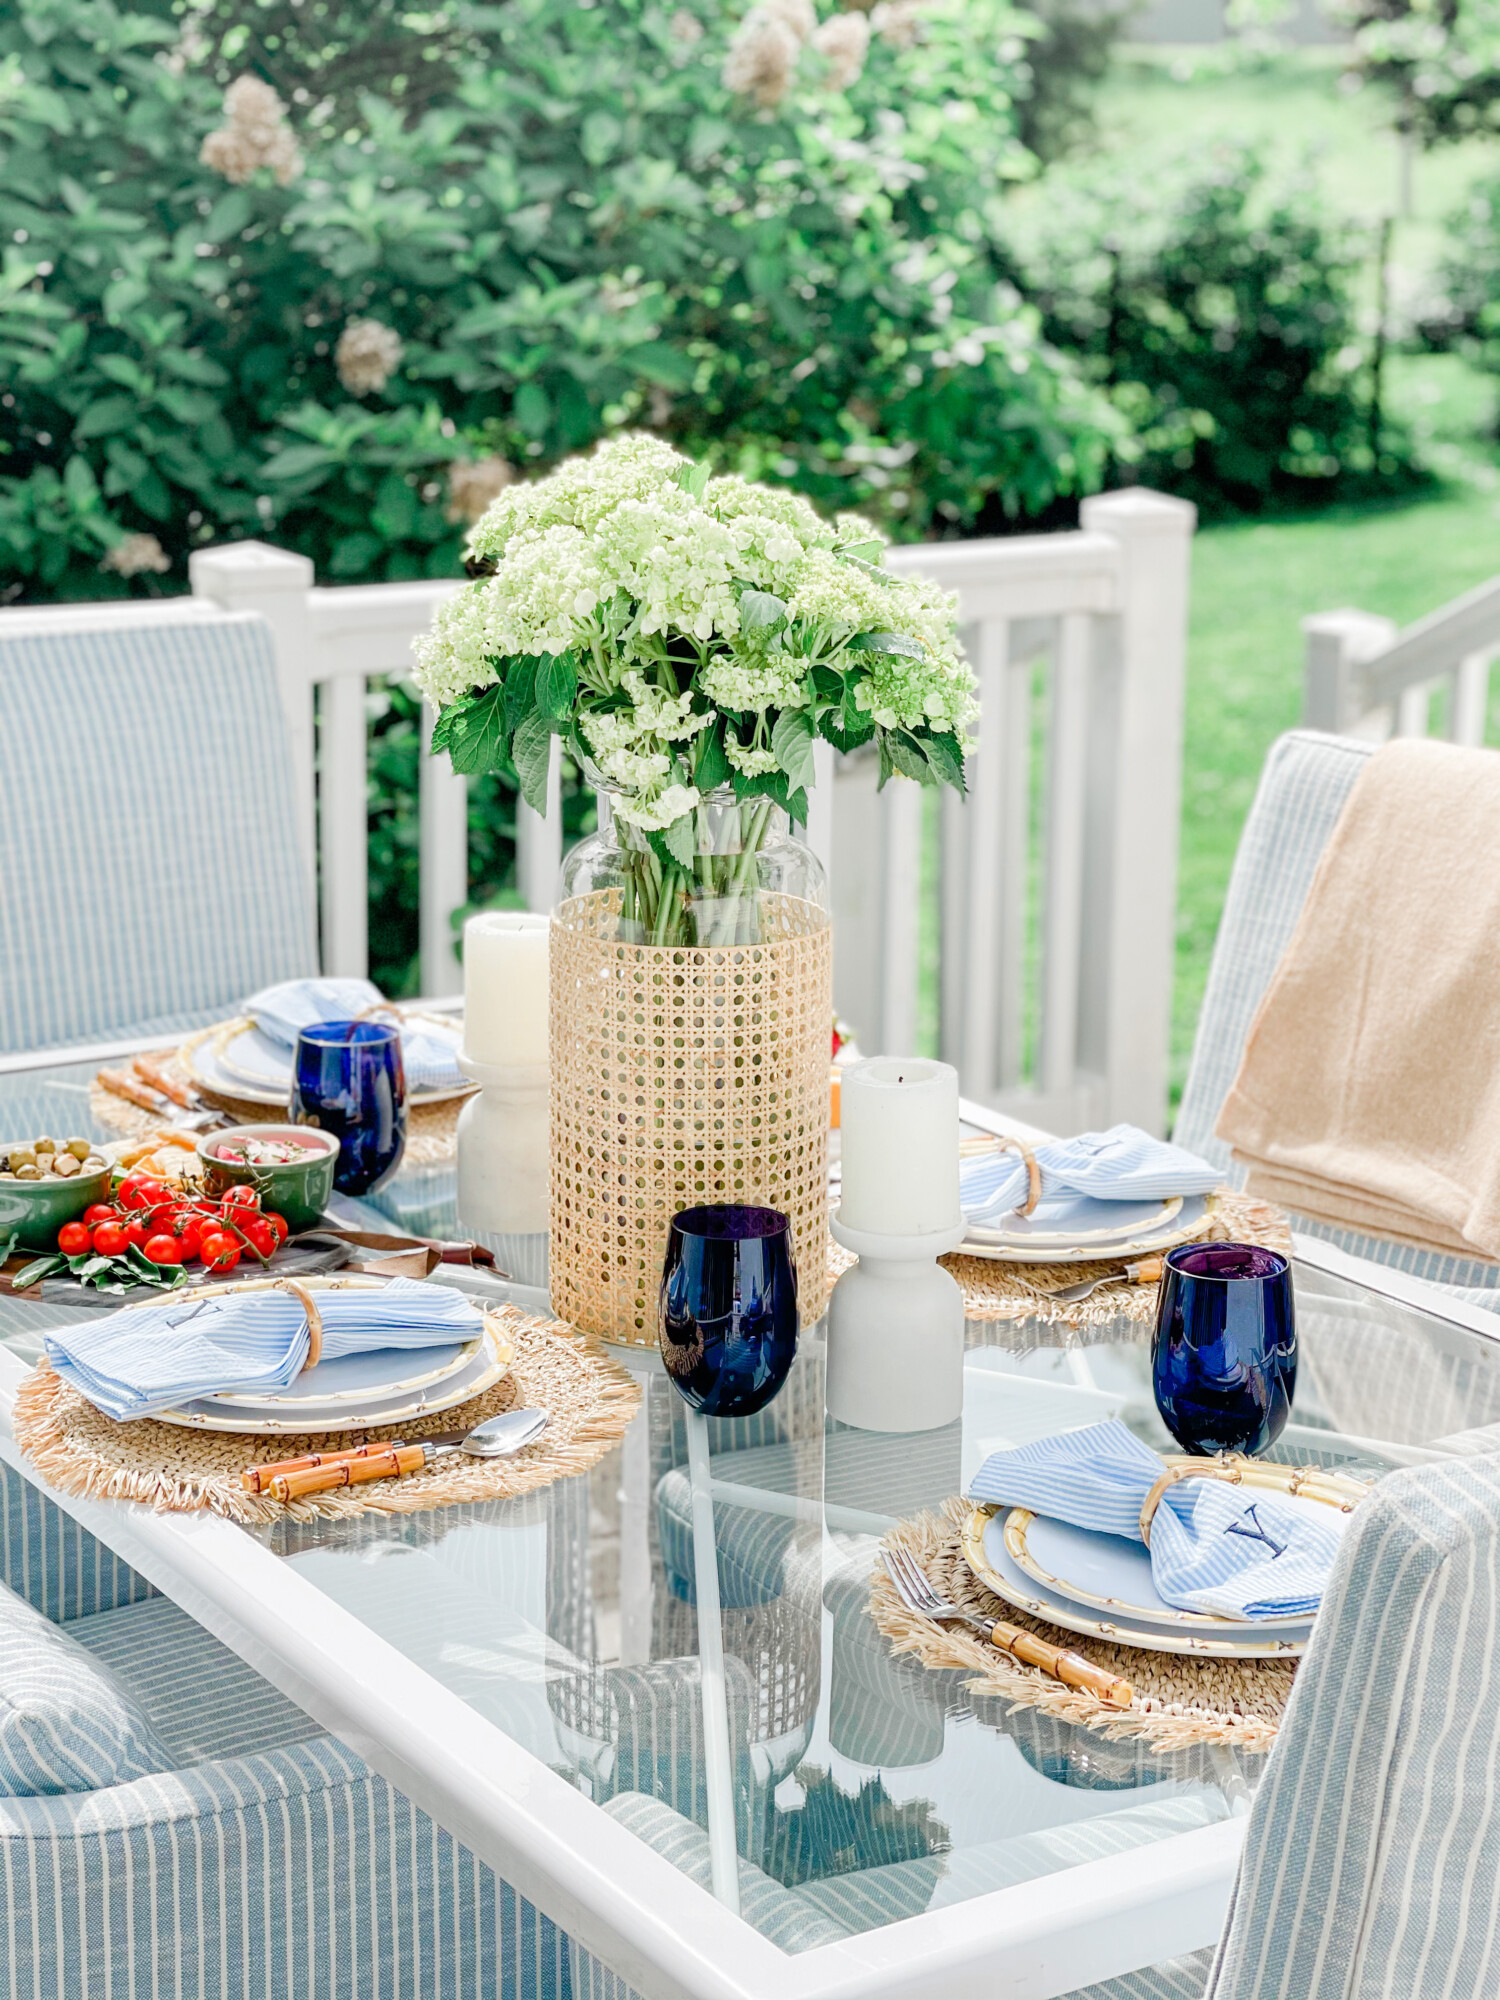 Outdoor entertaining with Mark and Graham - Margaret of York